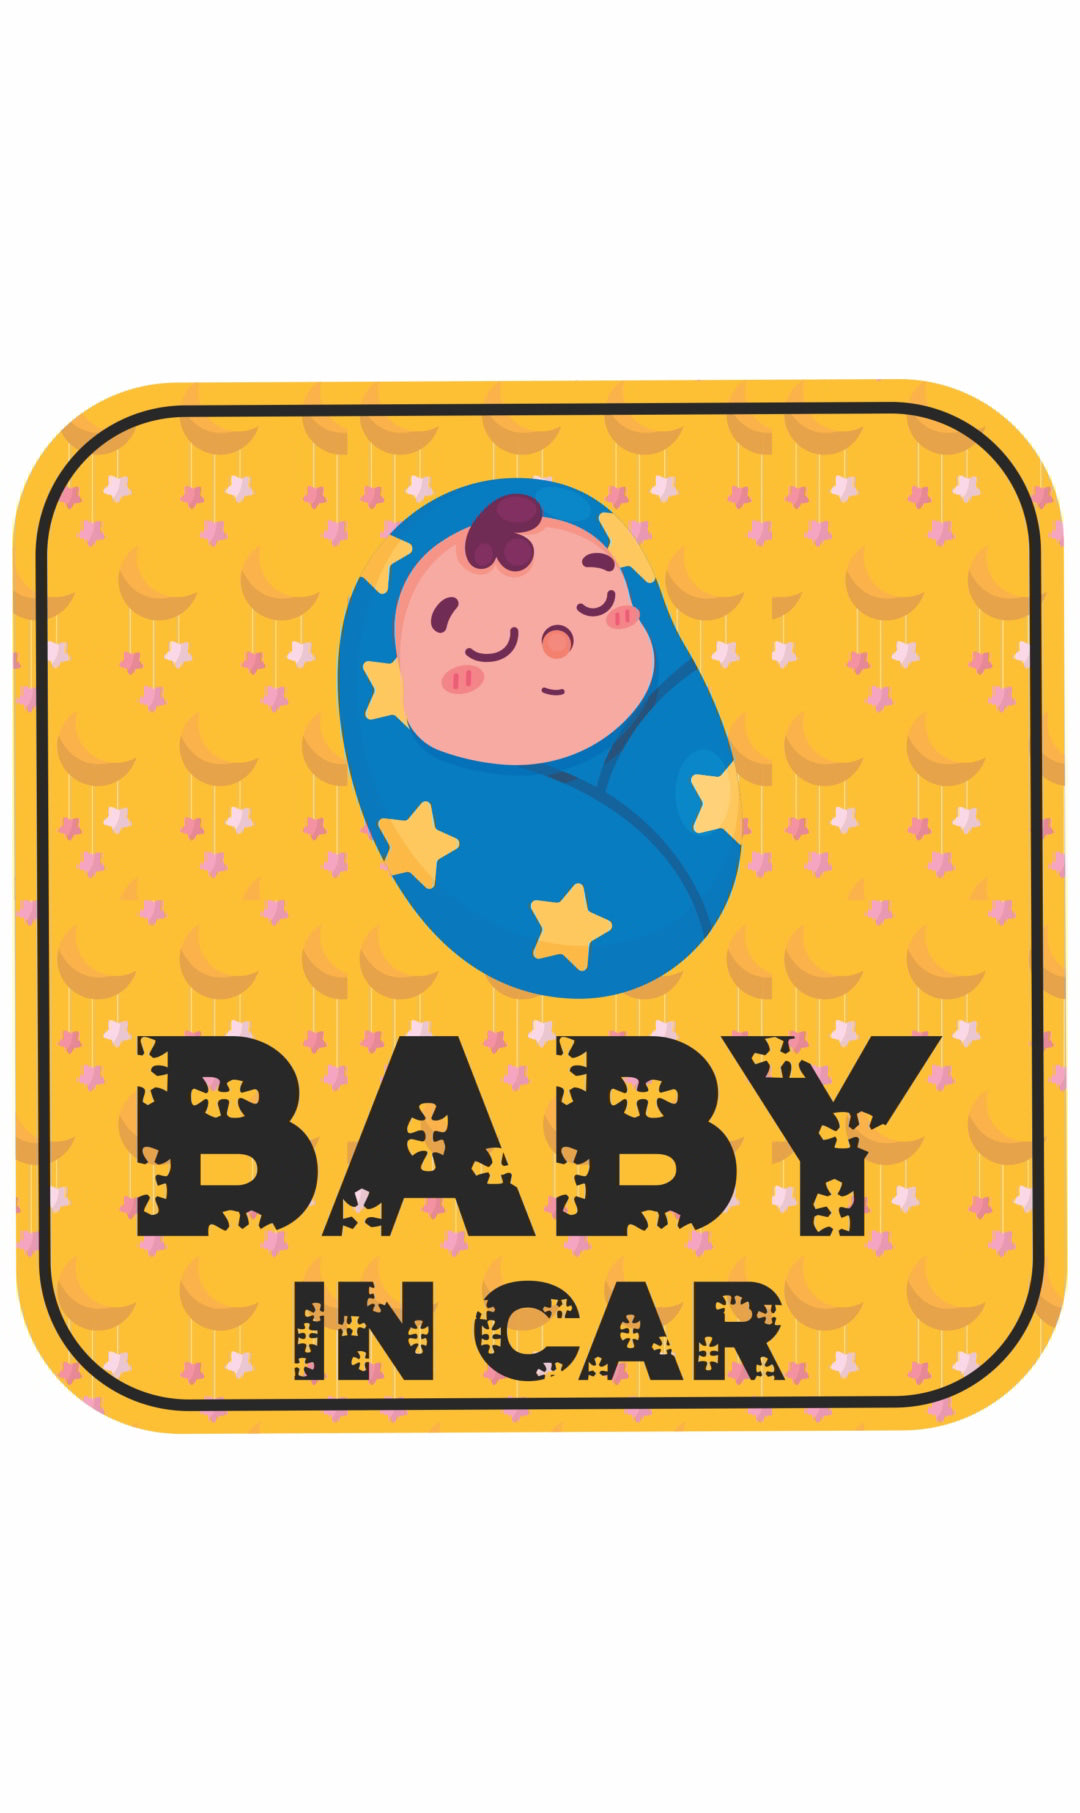 Baby in Car Decal Sticker(2pc)_c30